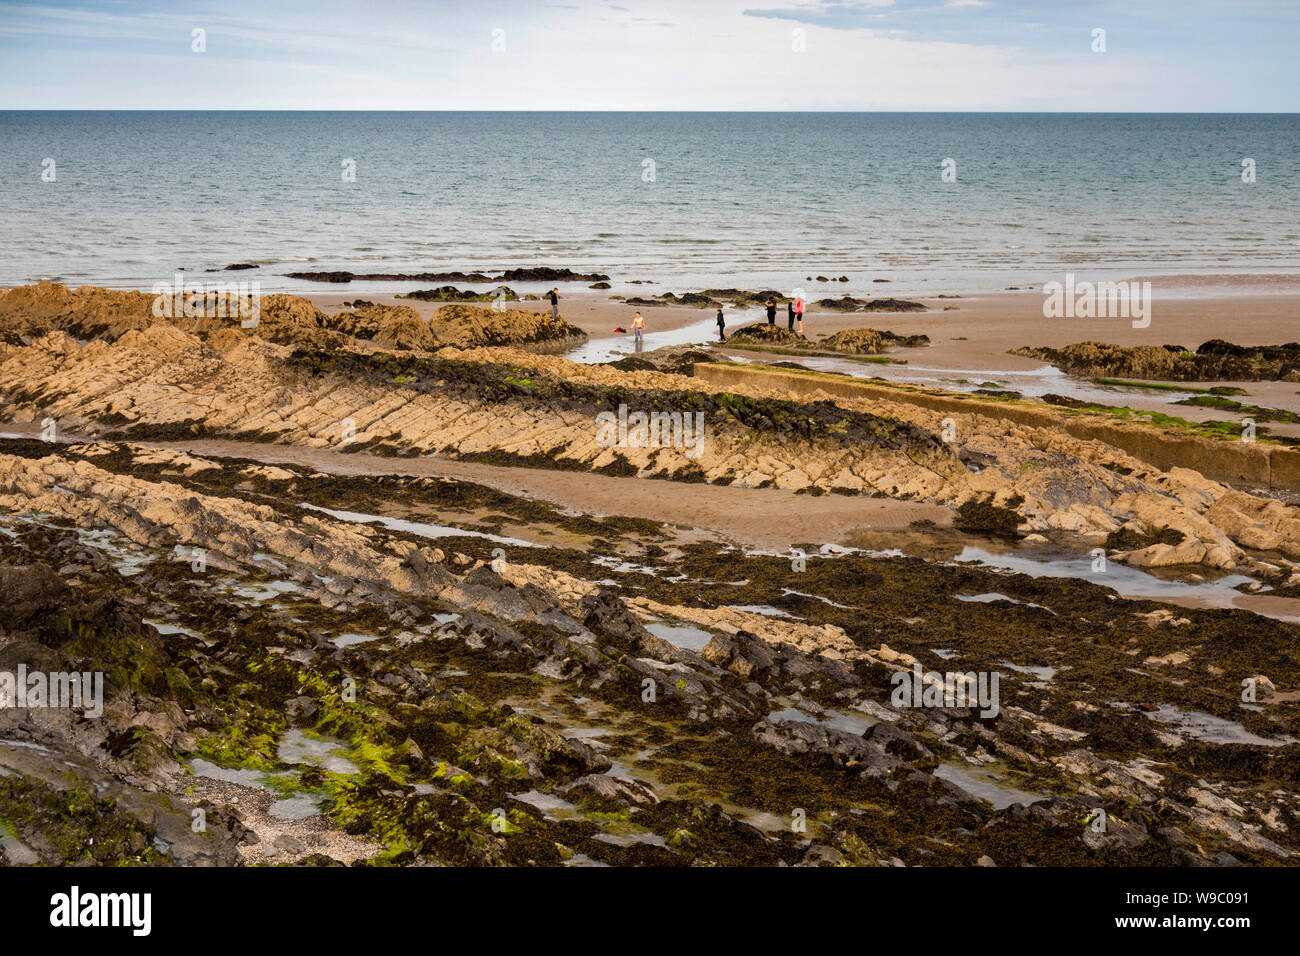 Ireland, Leinster, Fingal, Portmarnock, children playing on rocky shore exposed at low tide Stock Photo